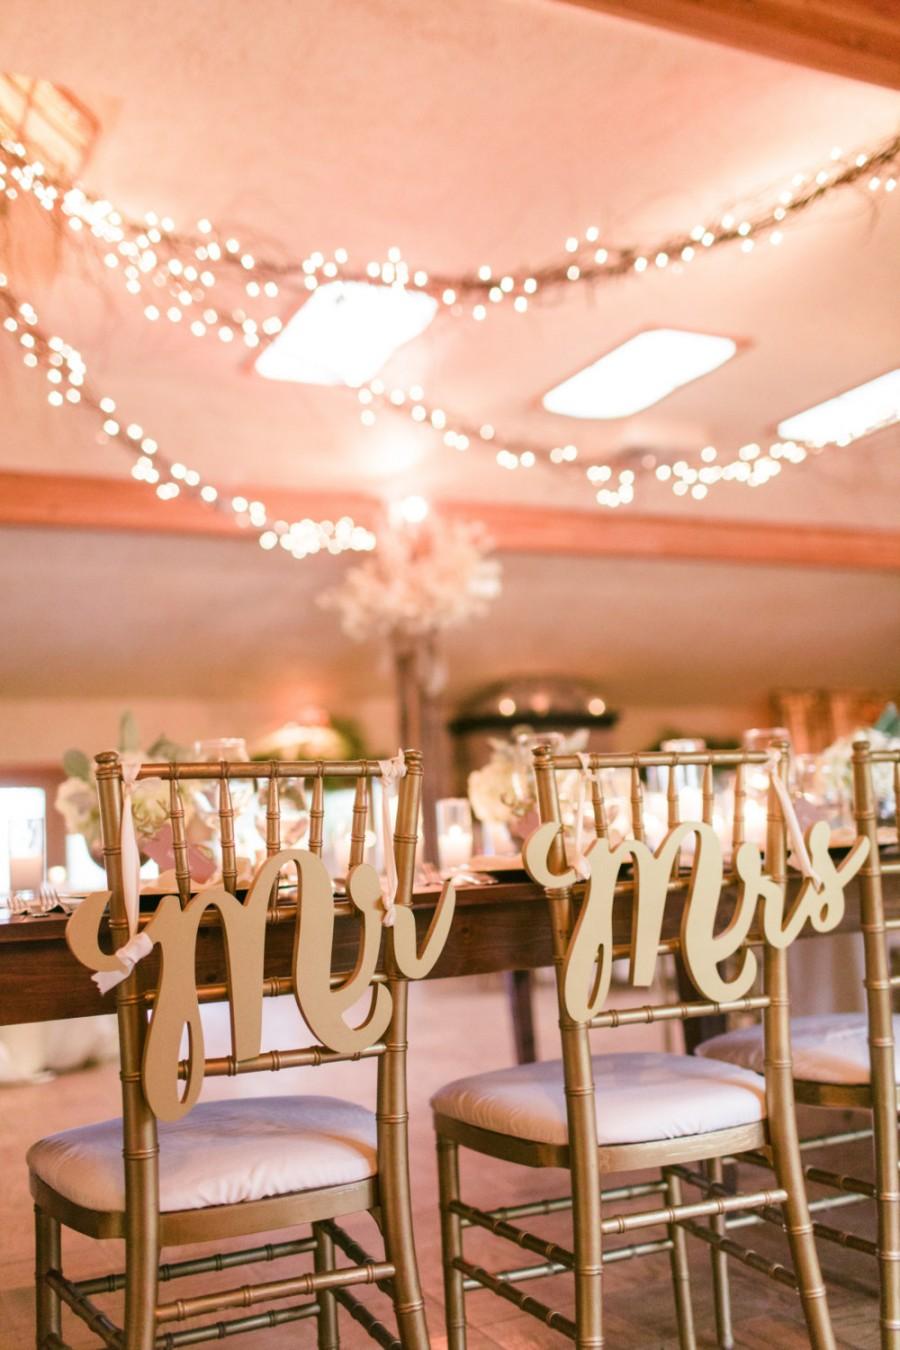 Mariage - Gold Chair Signs Mr & Mrs Signs for Wedding Chairs for Bride and Groom - Hanging Chair Signs Wedding Decor - 3 Piece Set (Item - MCK200)